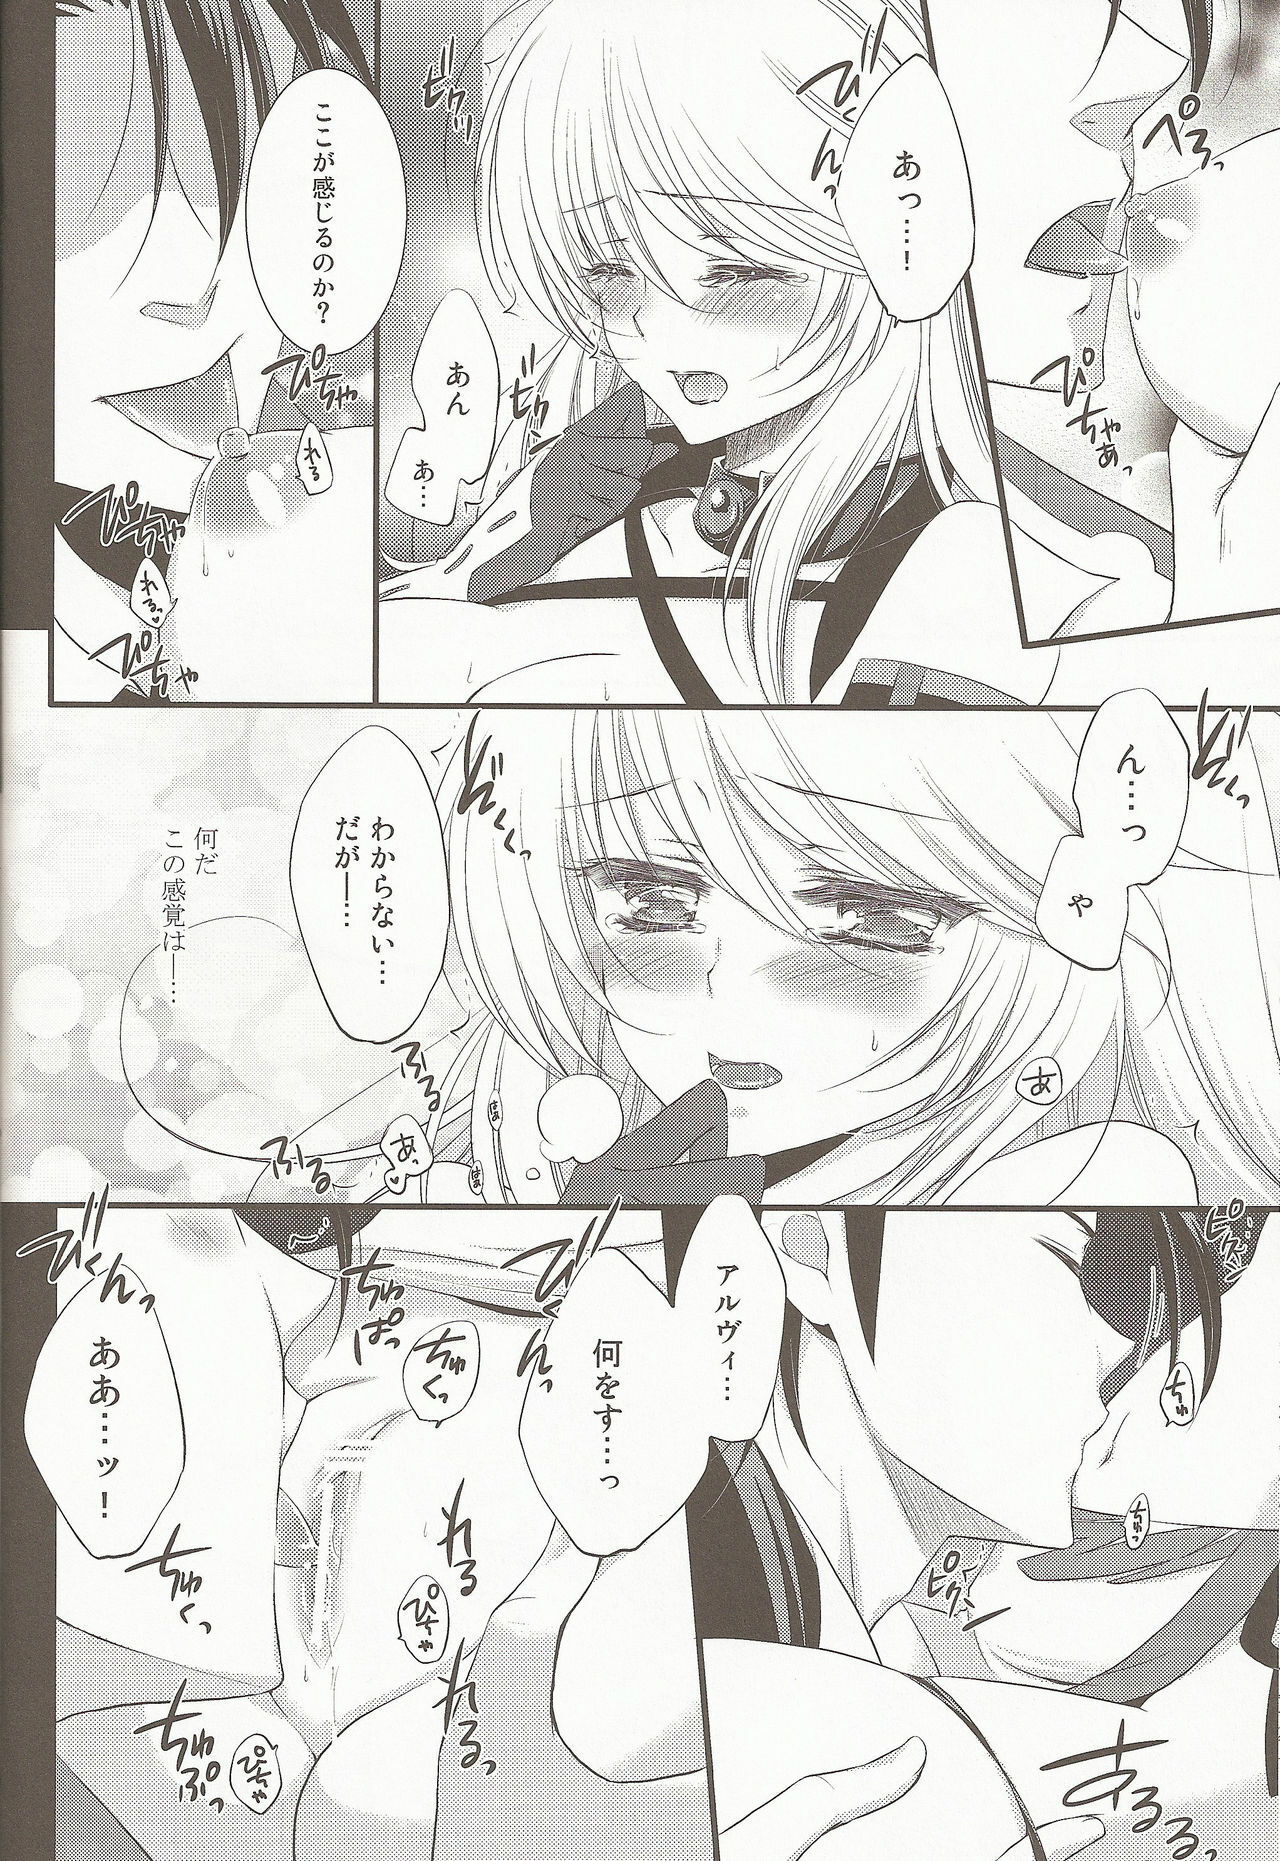 (C81) [Petica (Mikamikan)] External Link (Tales of Xillia) page 10 full